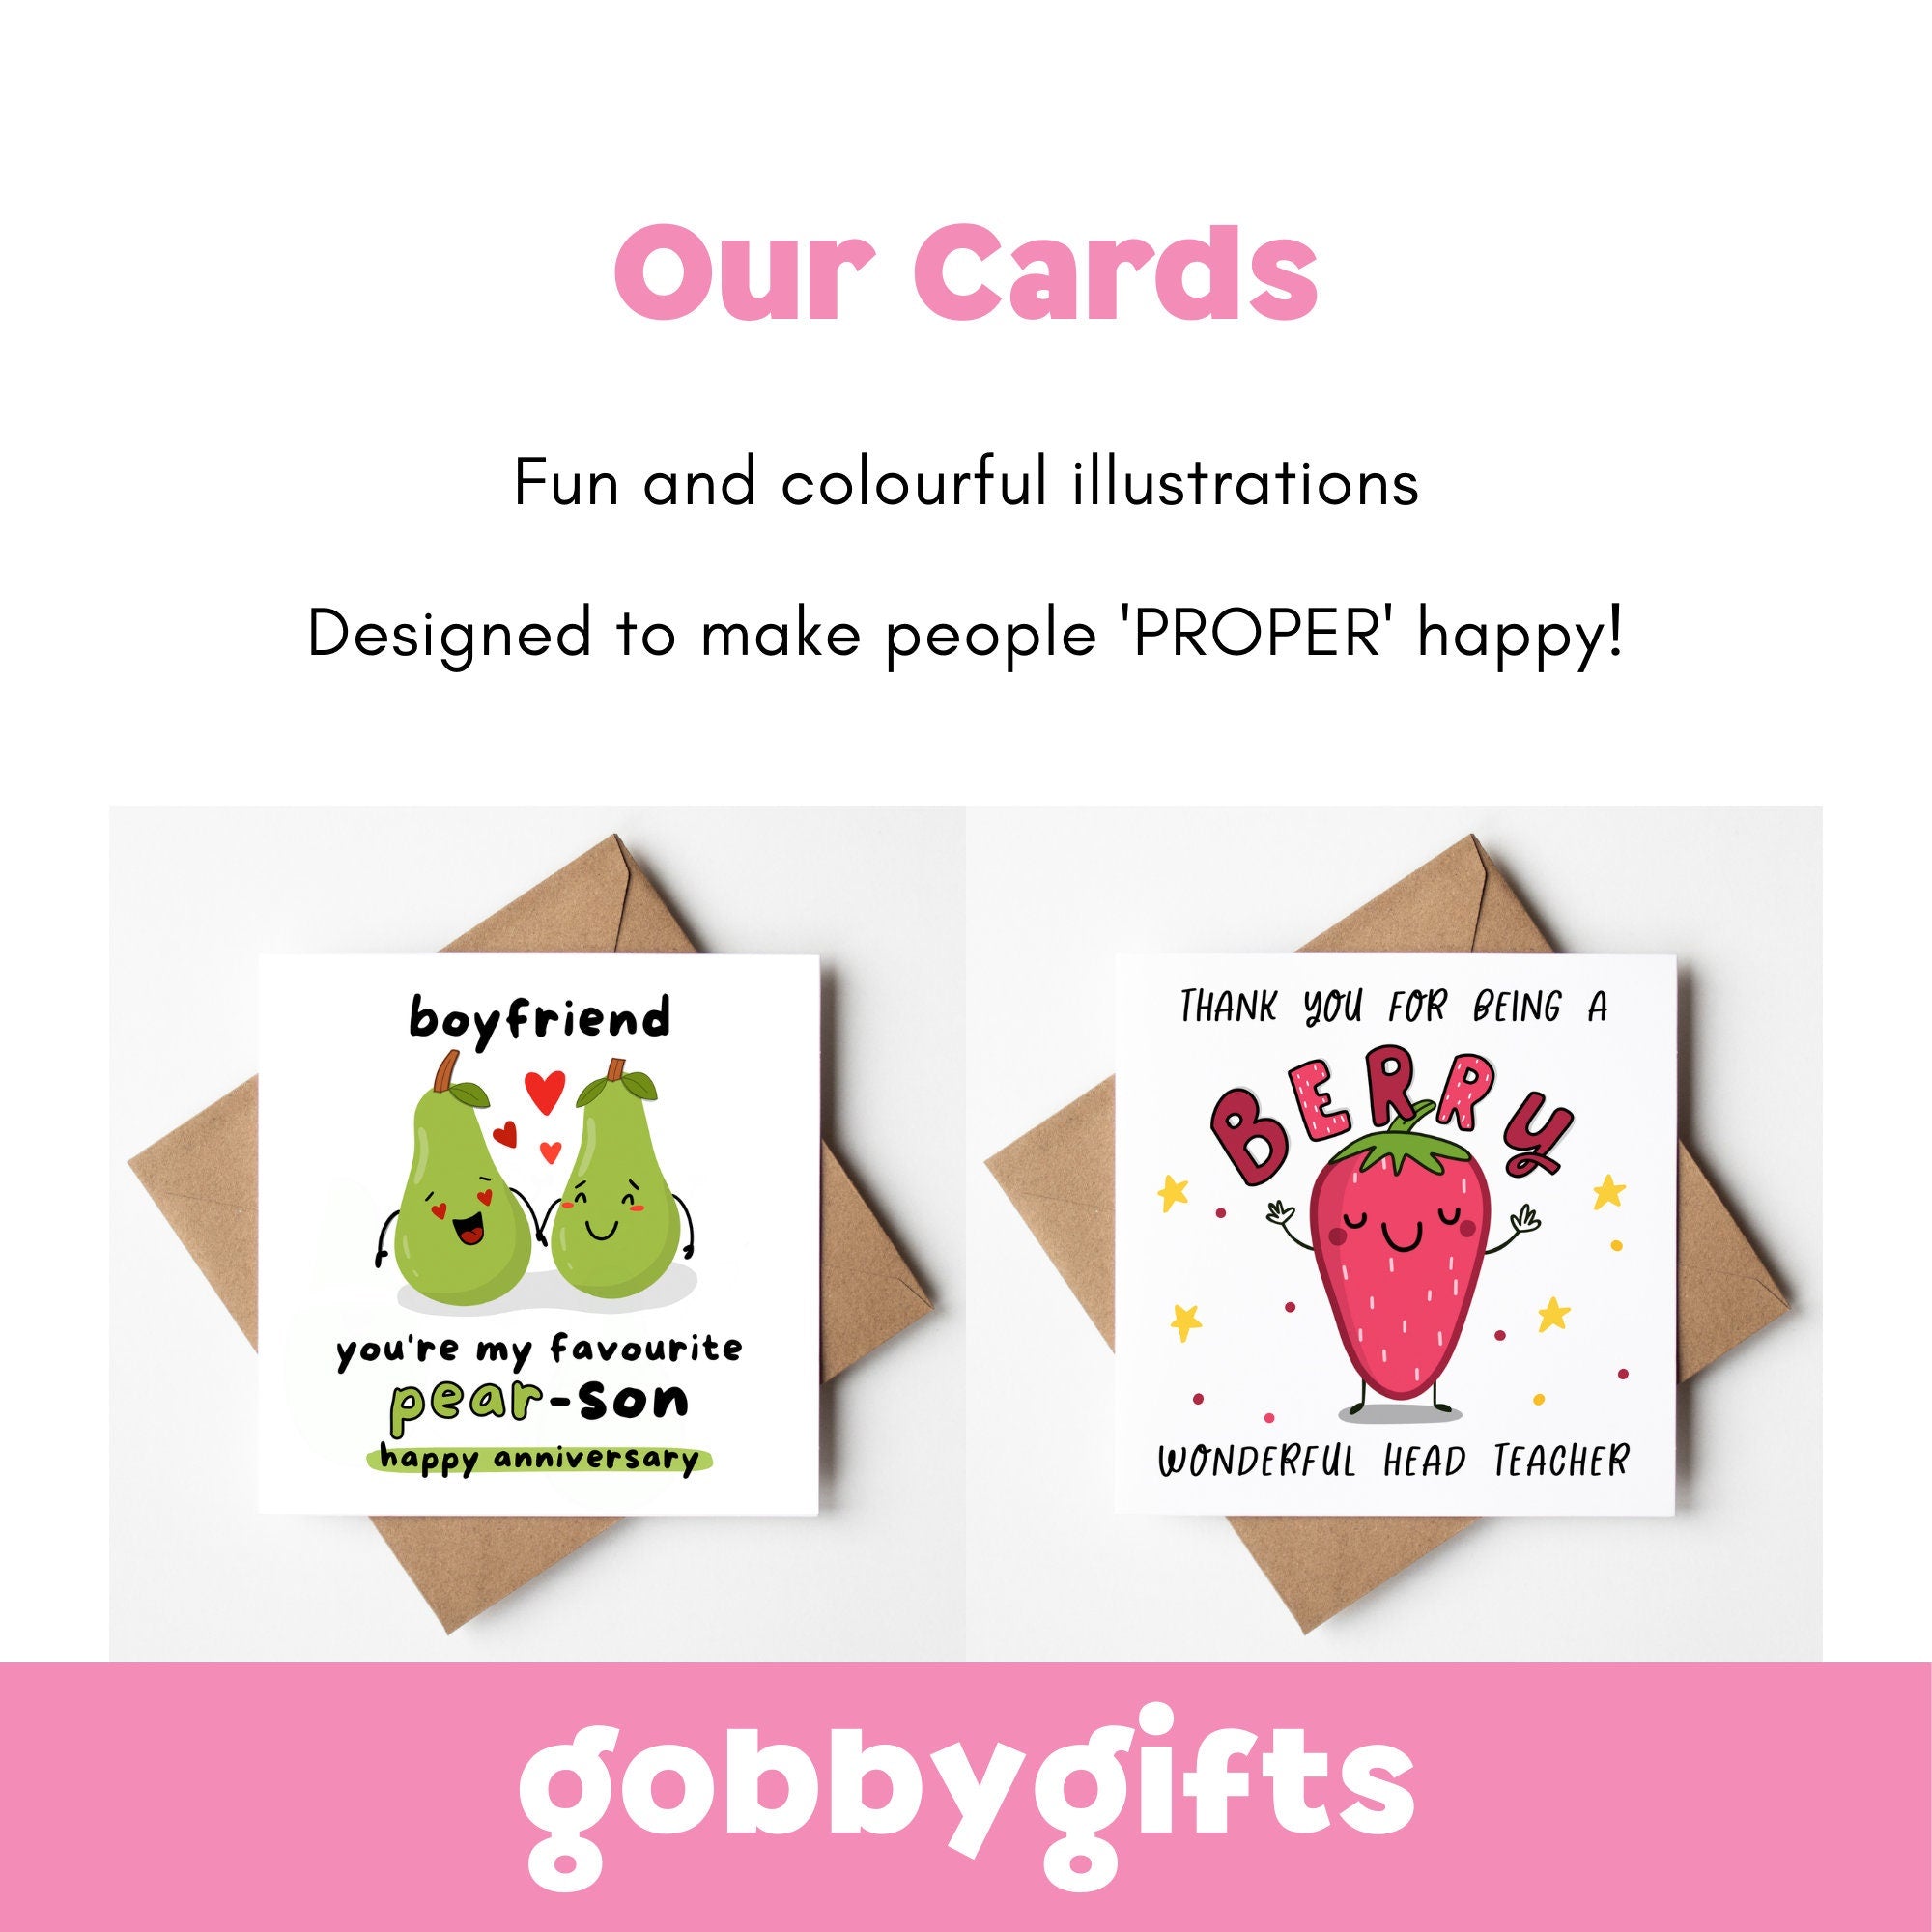 Funny Galentines Card, Funny Valentines Card, for friend, bestie, best friend, sister